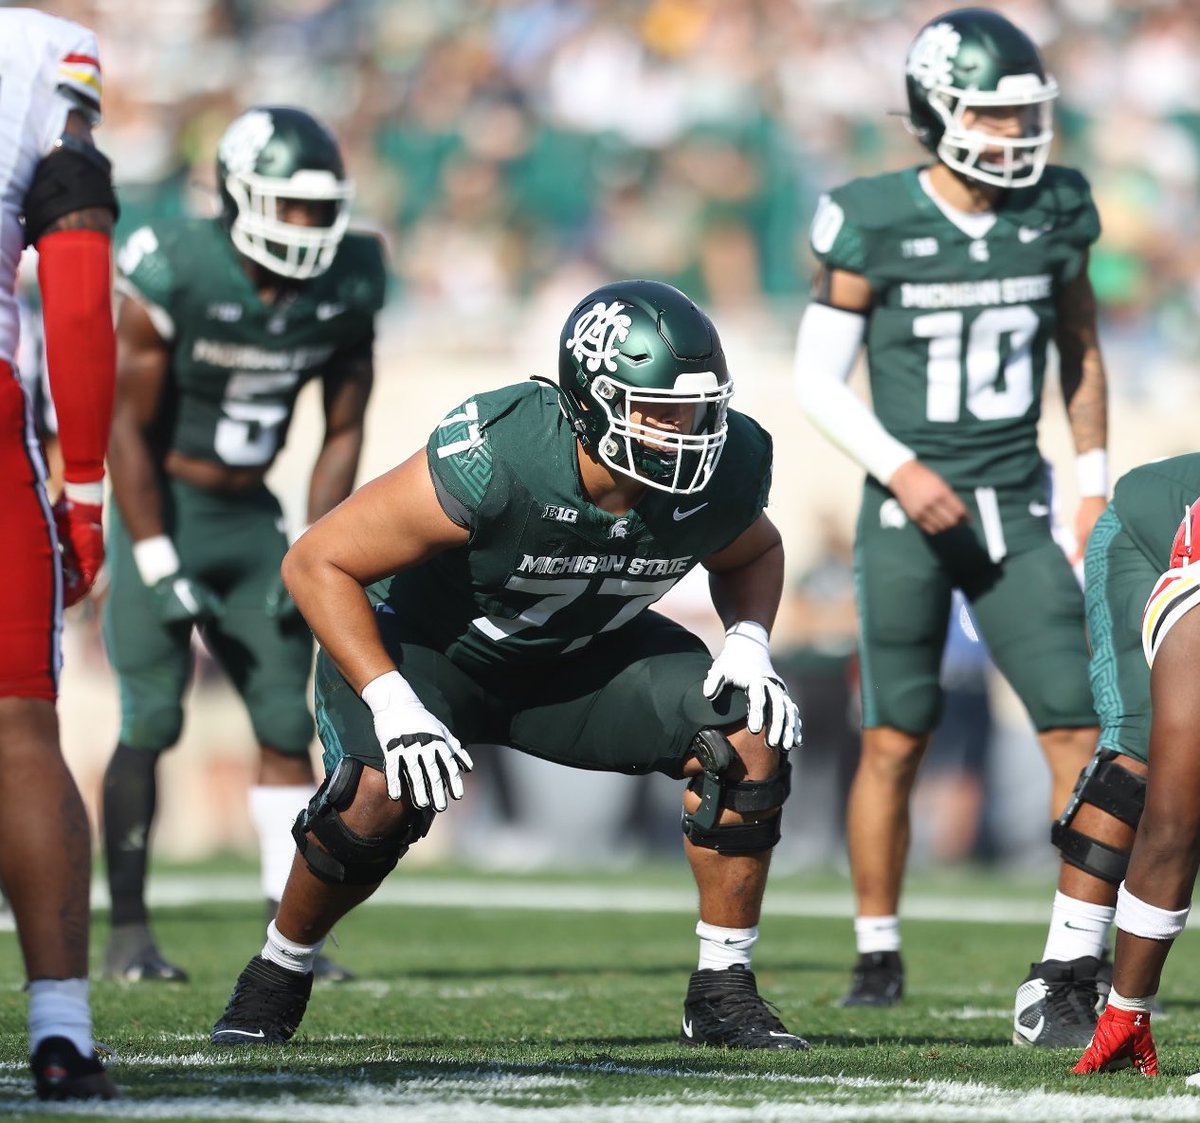 NEWS: OT Ethan Boyd has pulled his name out of the transfer portal and will return to #MichiganState, he tells me. The East Lansing native is in line for major playing time at right tackle next season. Had gotten multiple P5 portal offers. 247sports.com/player/ethan-b…